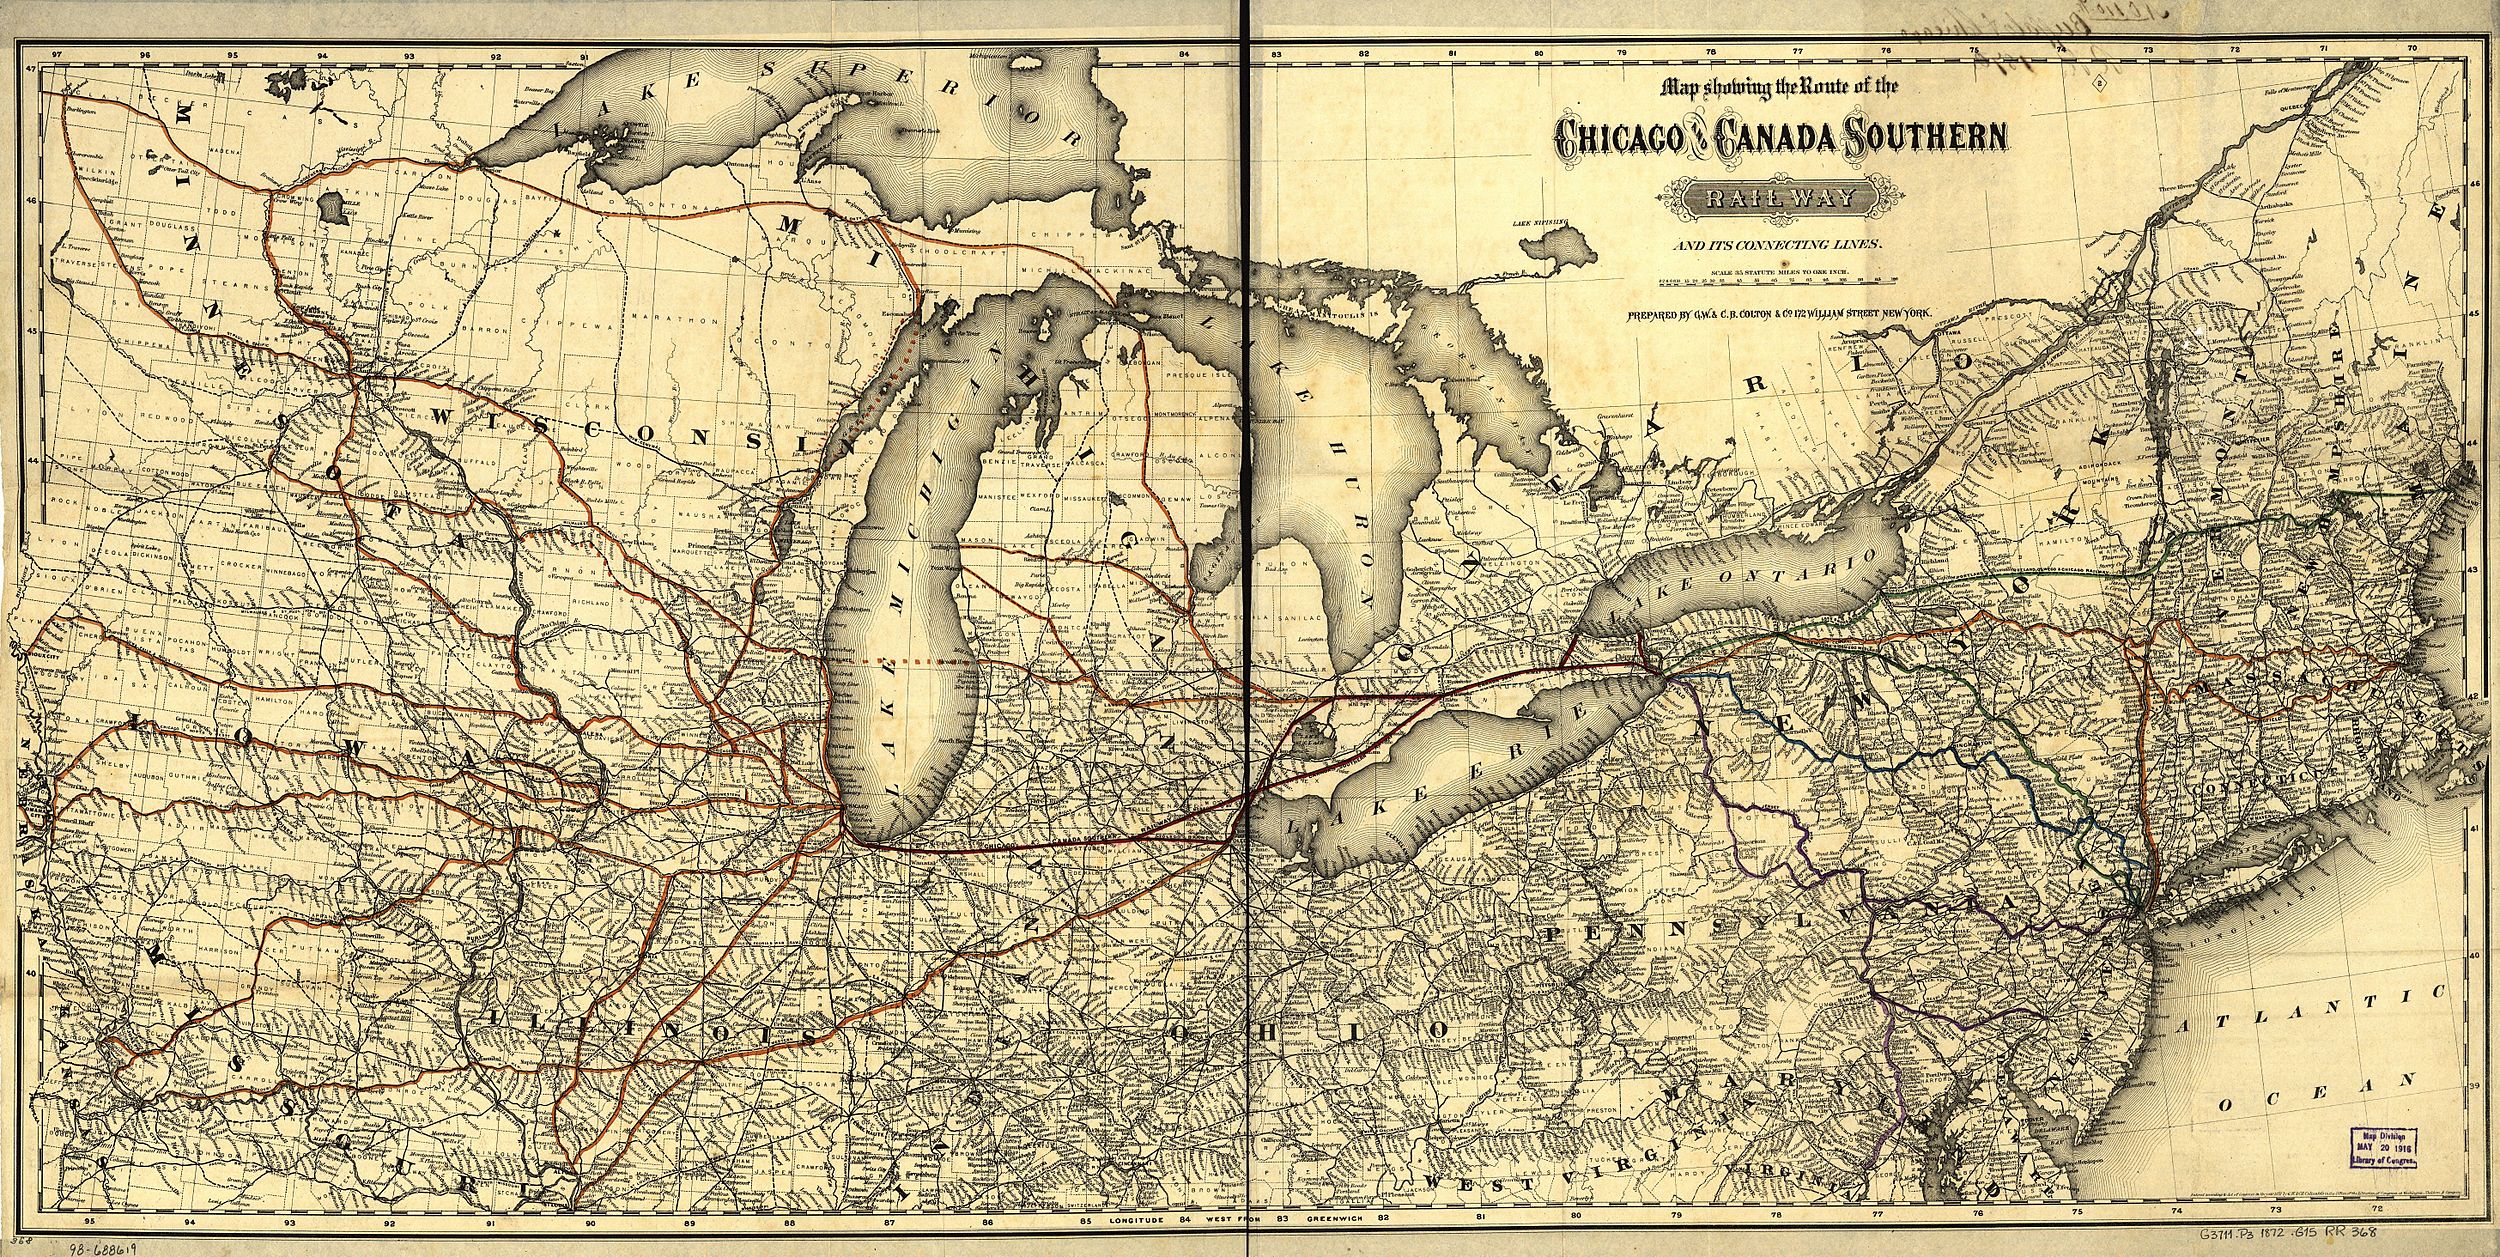 by 1872, the Toledo, Wabash and Western Railway (shown in red) connected Toledo, Fort Wayne, and Lafayette. The original canal, with its slow pace and maintenance issues, struggled to compete with many rail lines in operation in the 1870s.